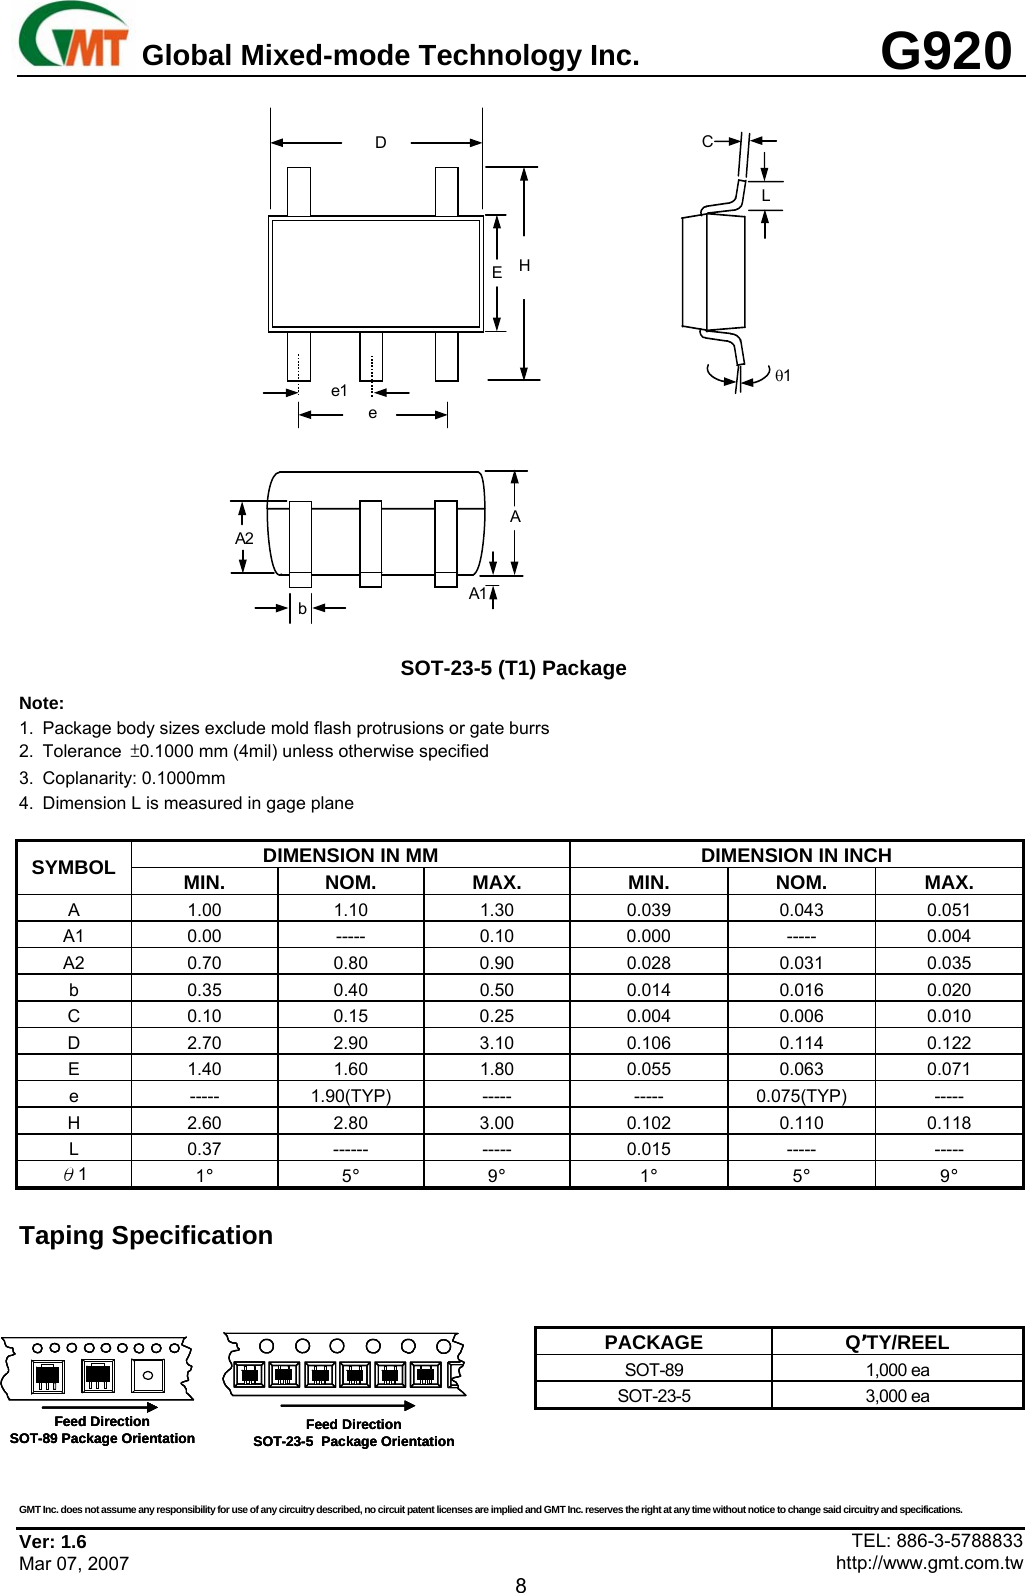 Page 8 of 9 - G920 - Datasheet. Www.s-manuals.com. Gmt